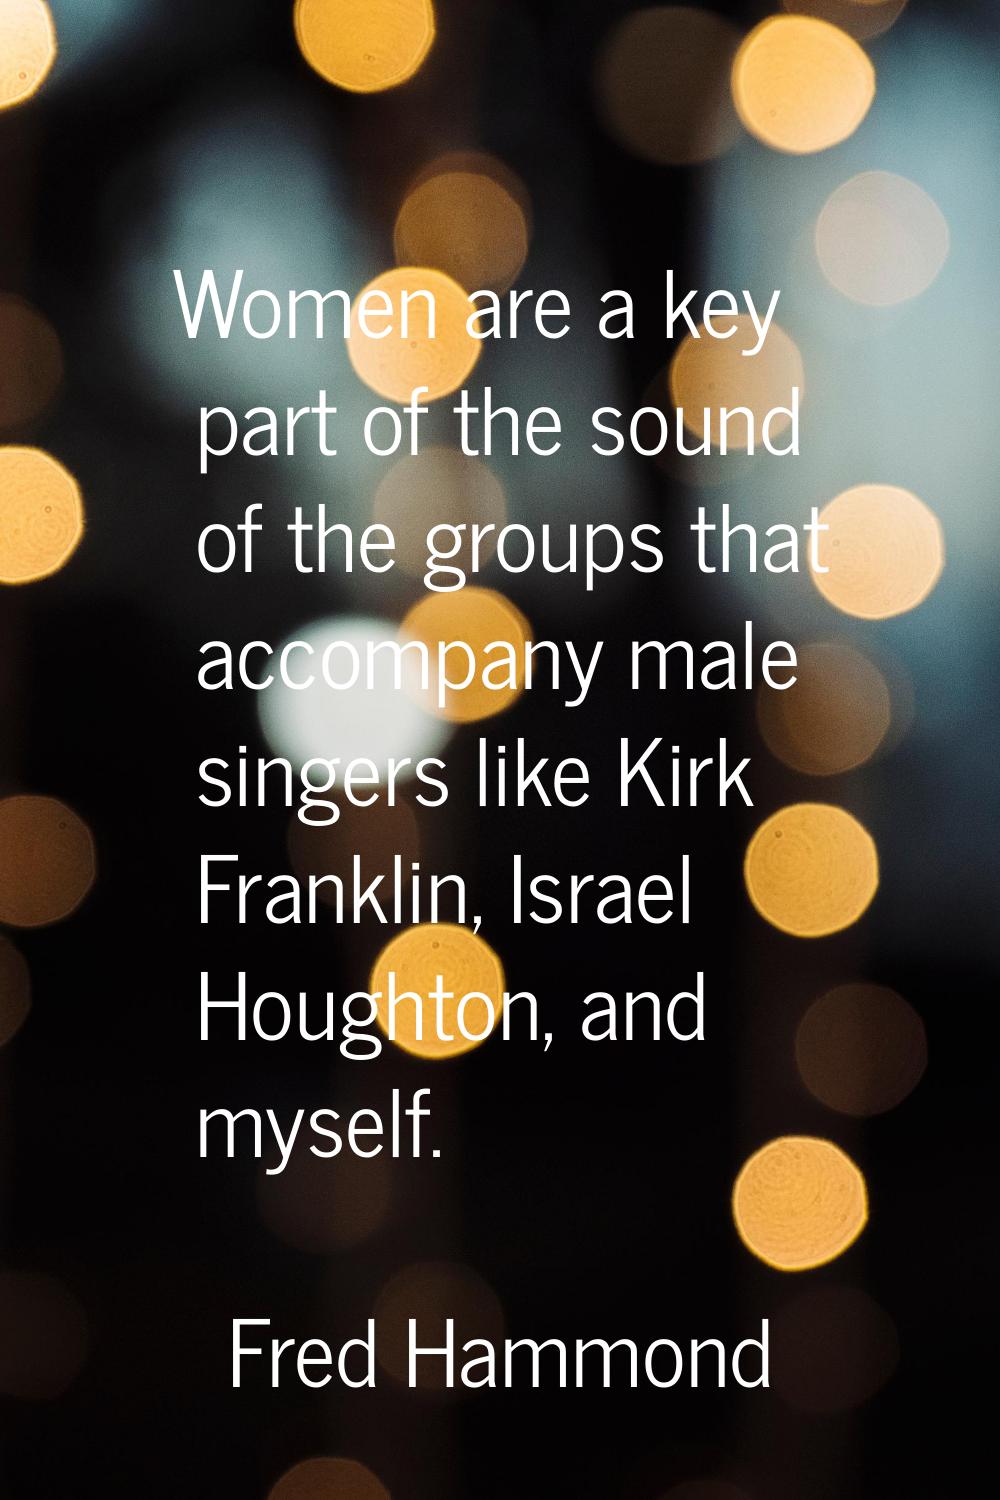 Women are a key part of the sound of the groups that accompany male singers like Kirk Franklin, Isr